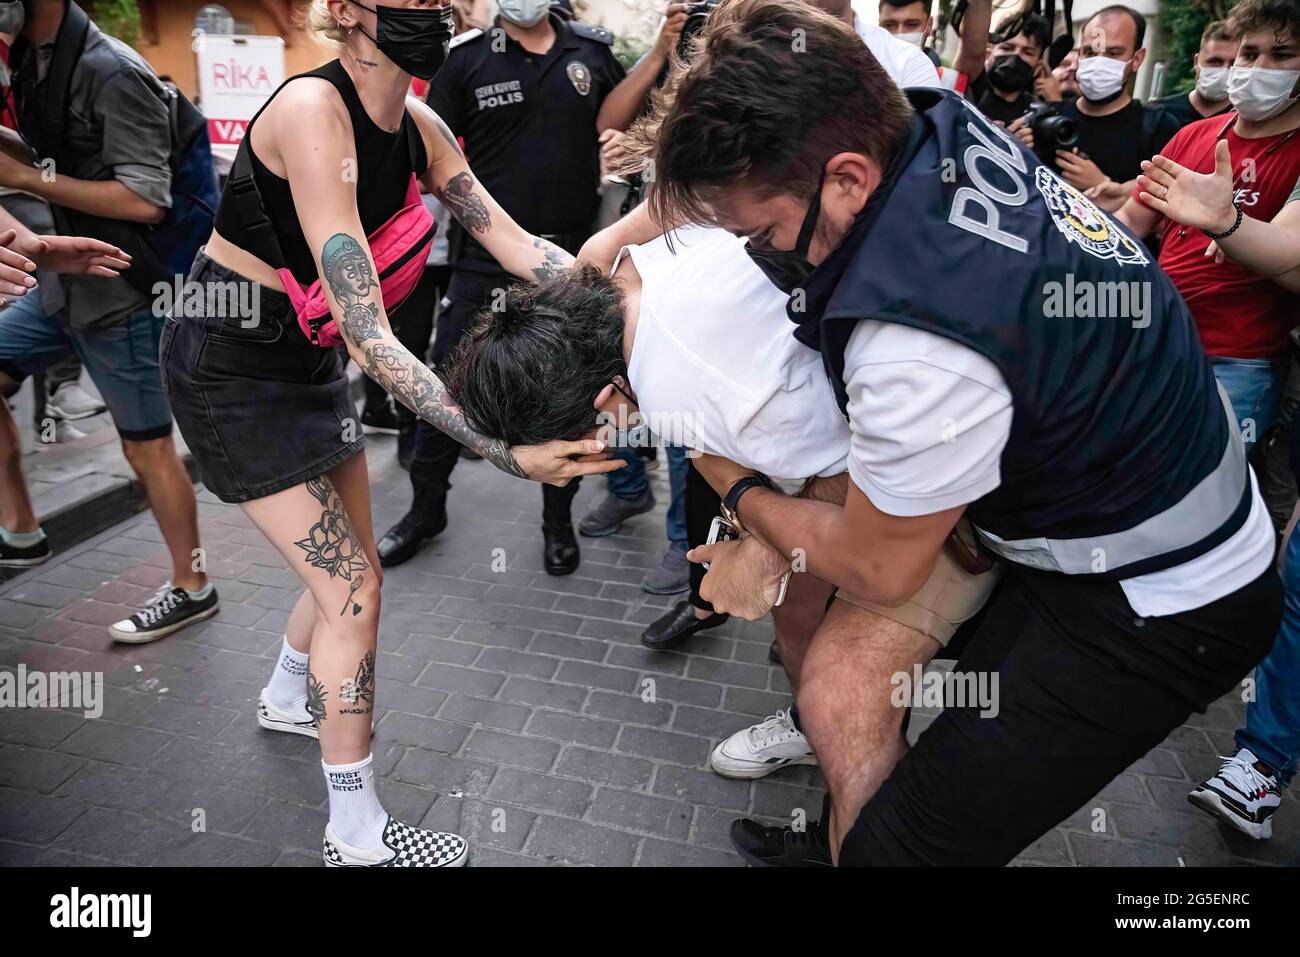 Police officers arrest a protester during the demonstration. Turkish police detained ten people who defied the ban on Pride parade, Bystanders reacting against the heavy-handed response were among the people detained. (Photo by Murat Baykara / SOPA Images/Sipa USA) Stock Photo